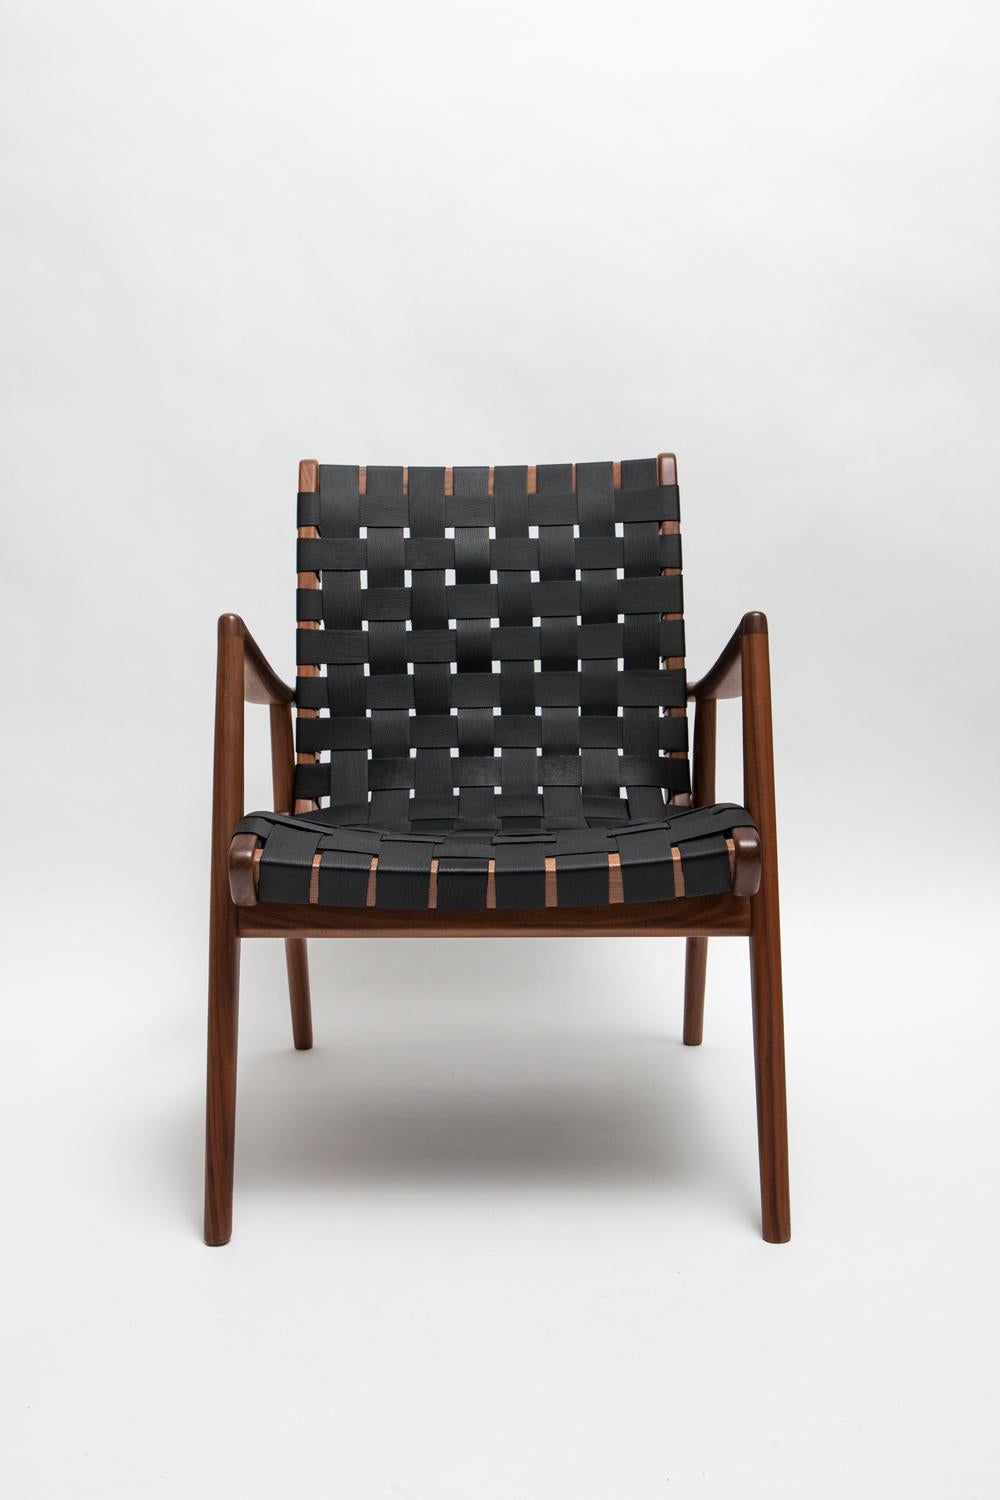 woven leather chair with arms